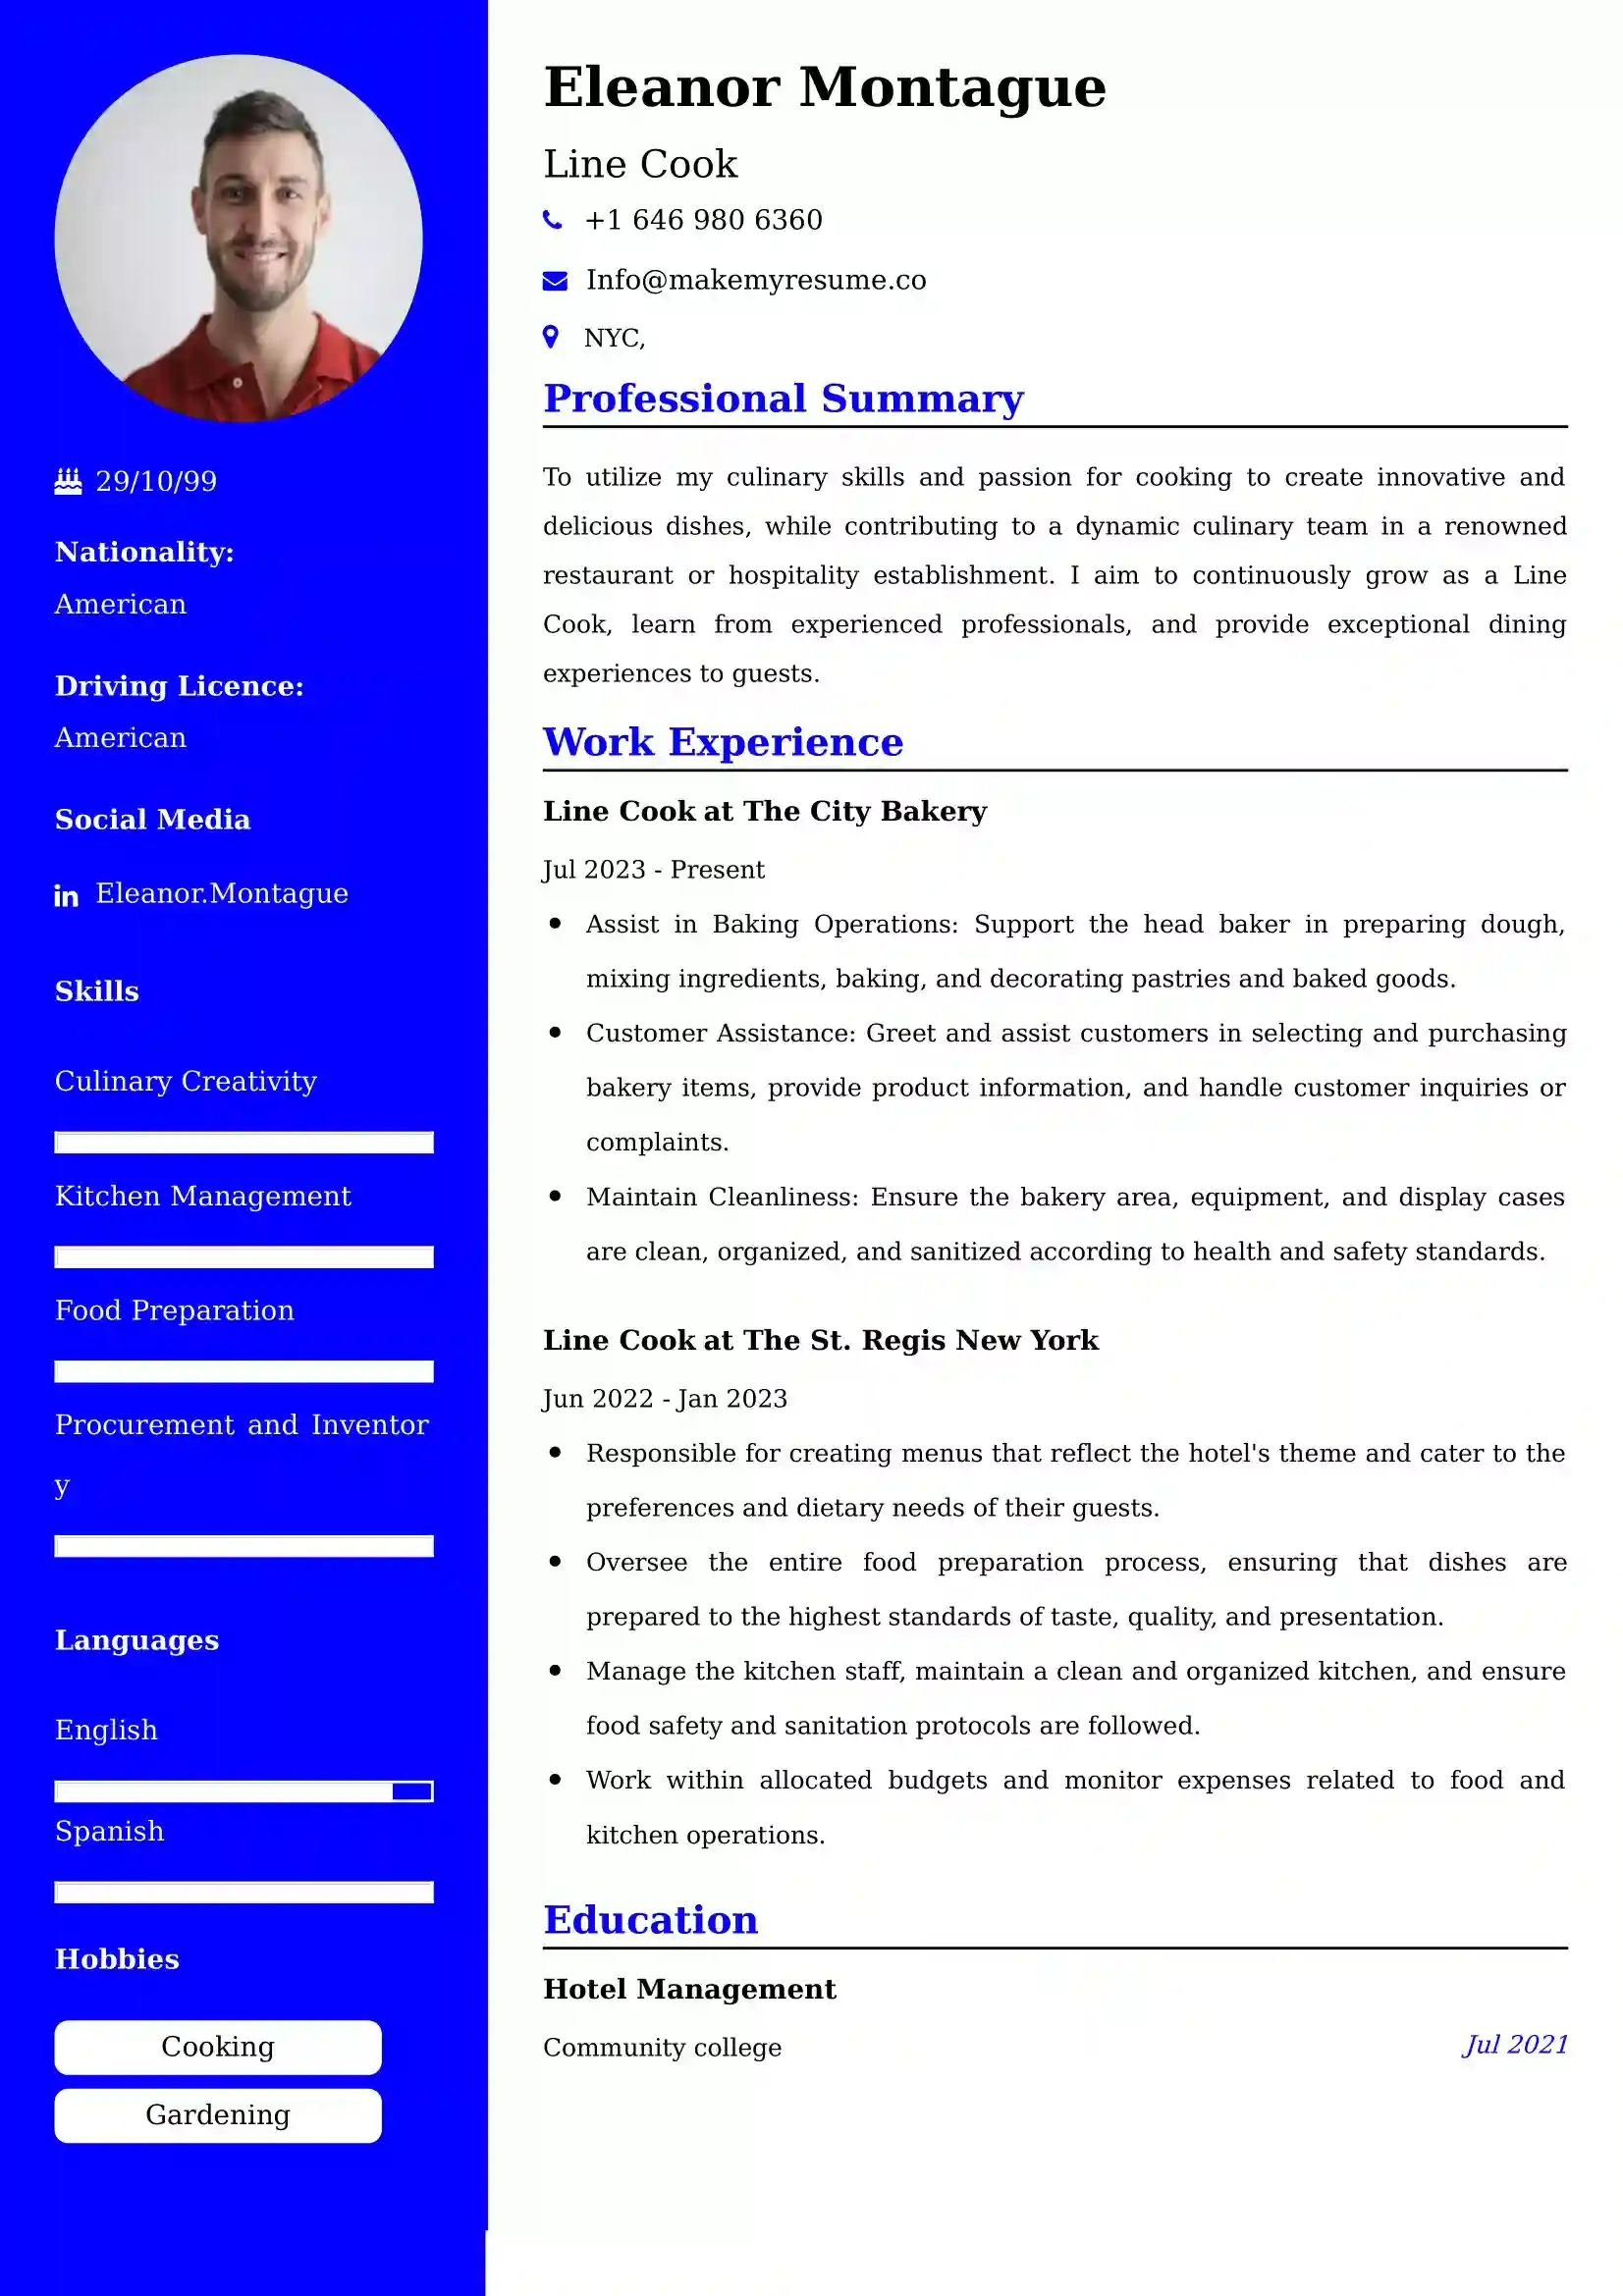 Line Cook Resume Examples - Brazilian Format, Latest Template